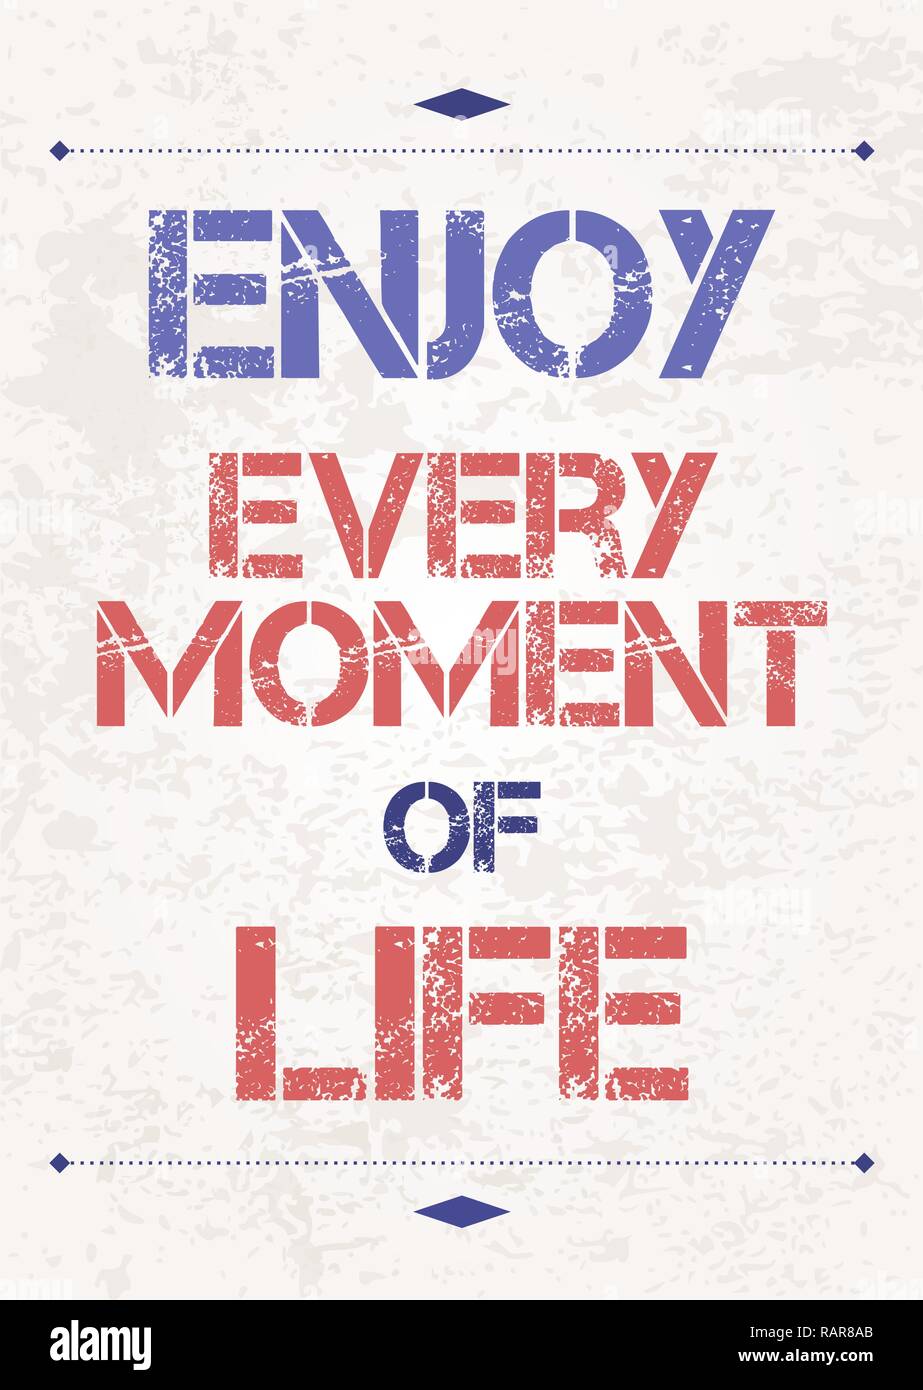 Enjoy every moment quote sign typography Vector Image